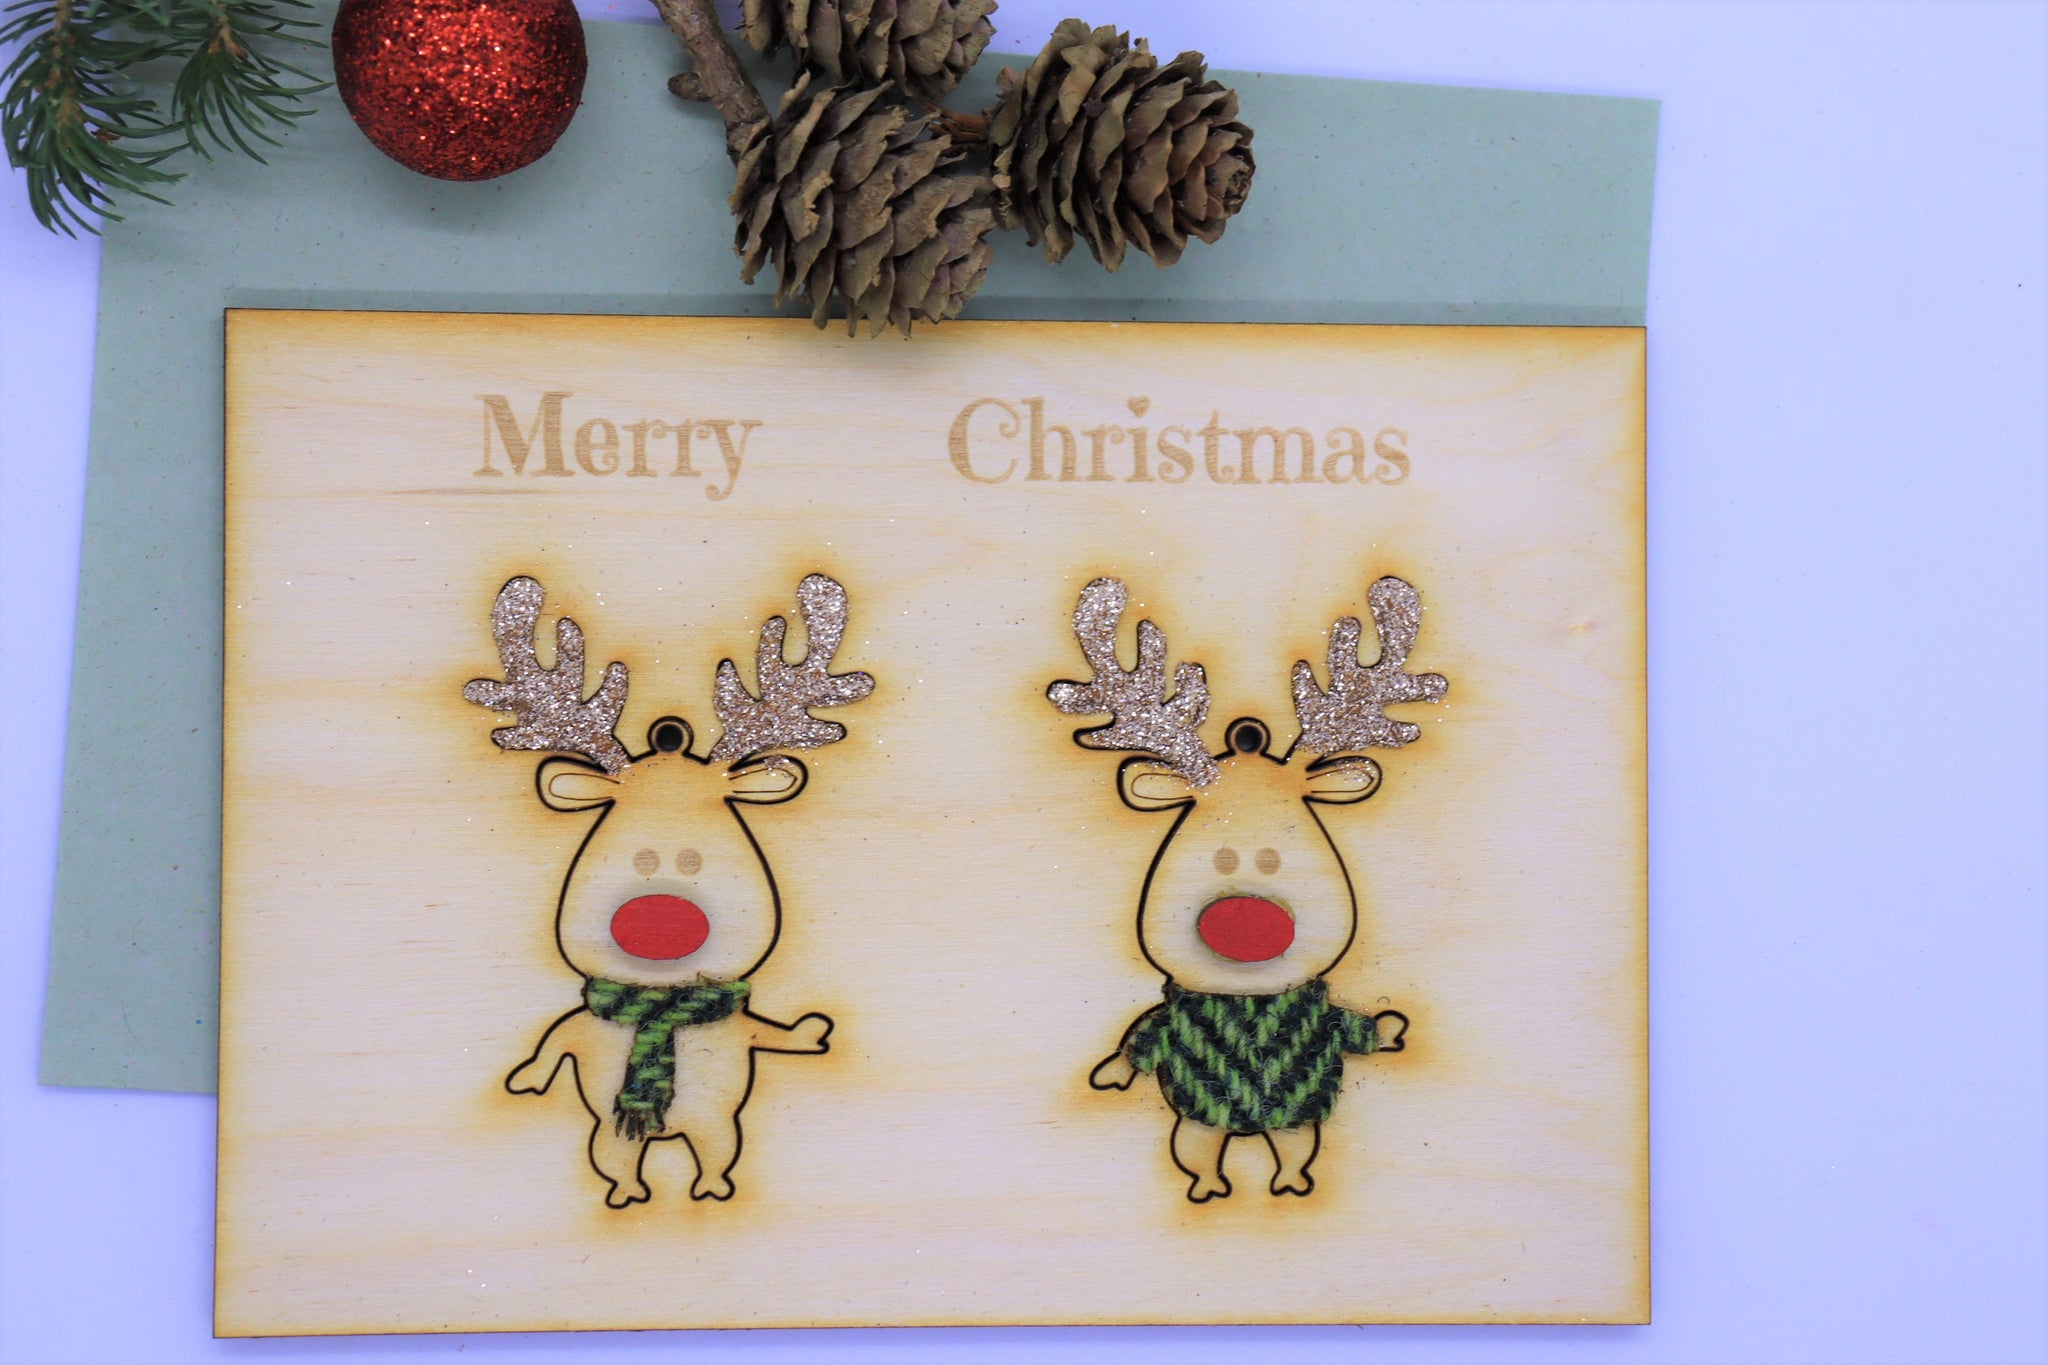 Wooden Christmas Card with Rudolph Reindeer